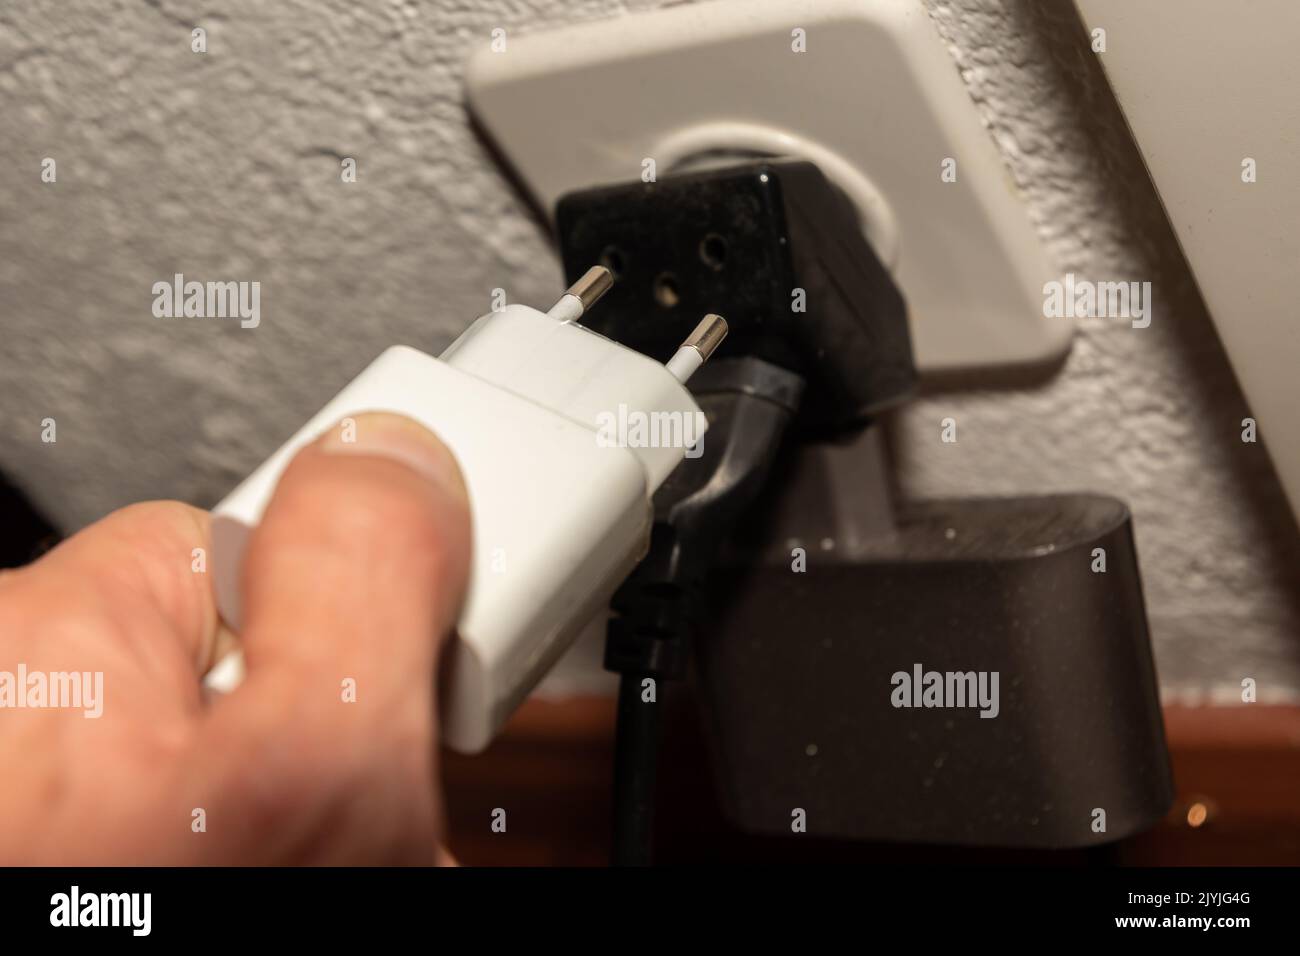 Vaduz, Liechtenstein, September 6, 2022 Electric power plug put in a socket to generate electricity in an apartment Stock Photo